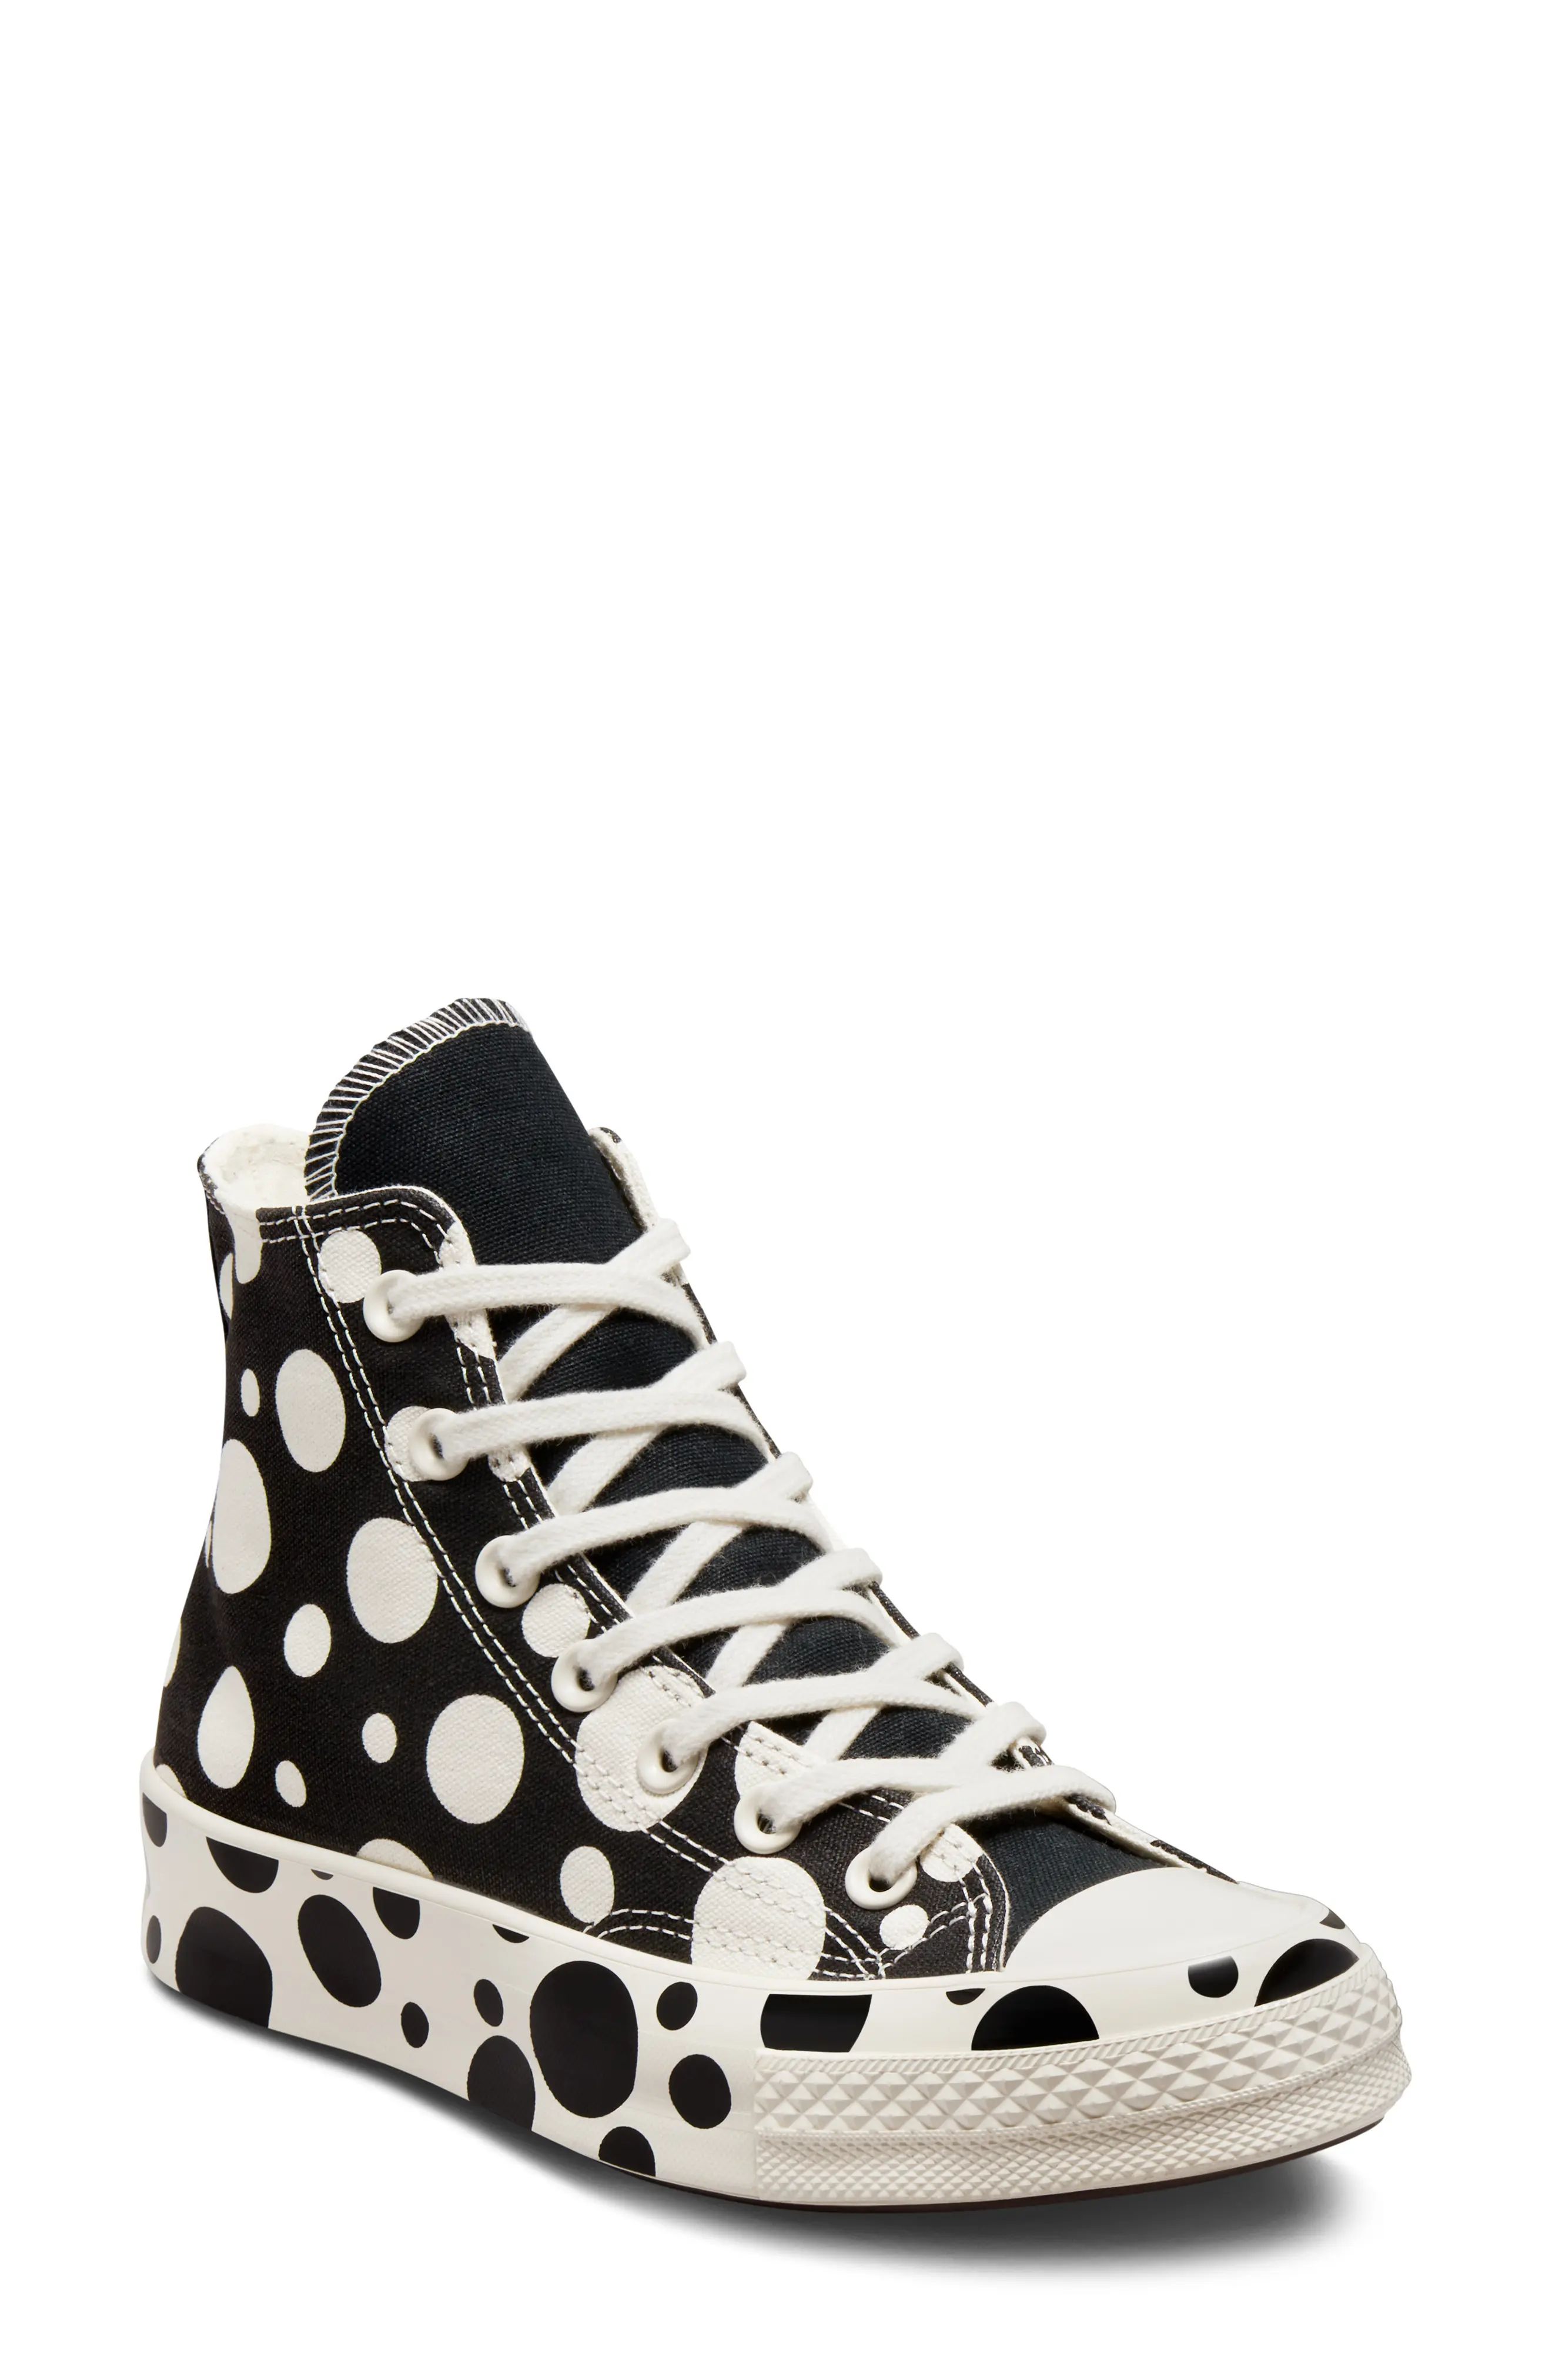 Converse Chuck Taylor(R) 70 High Top Sneaker in Converse Black at Nordstrom, Size 8 | Nordstrom